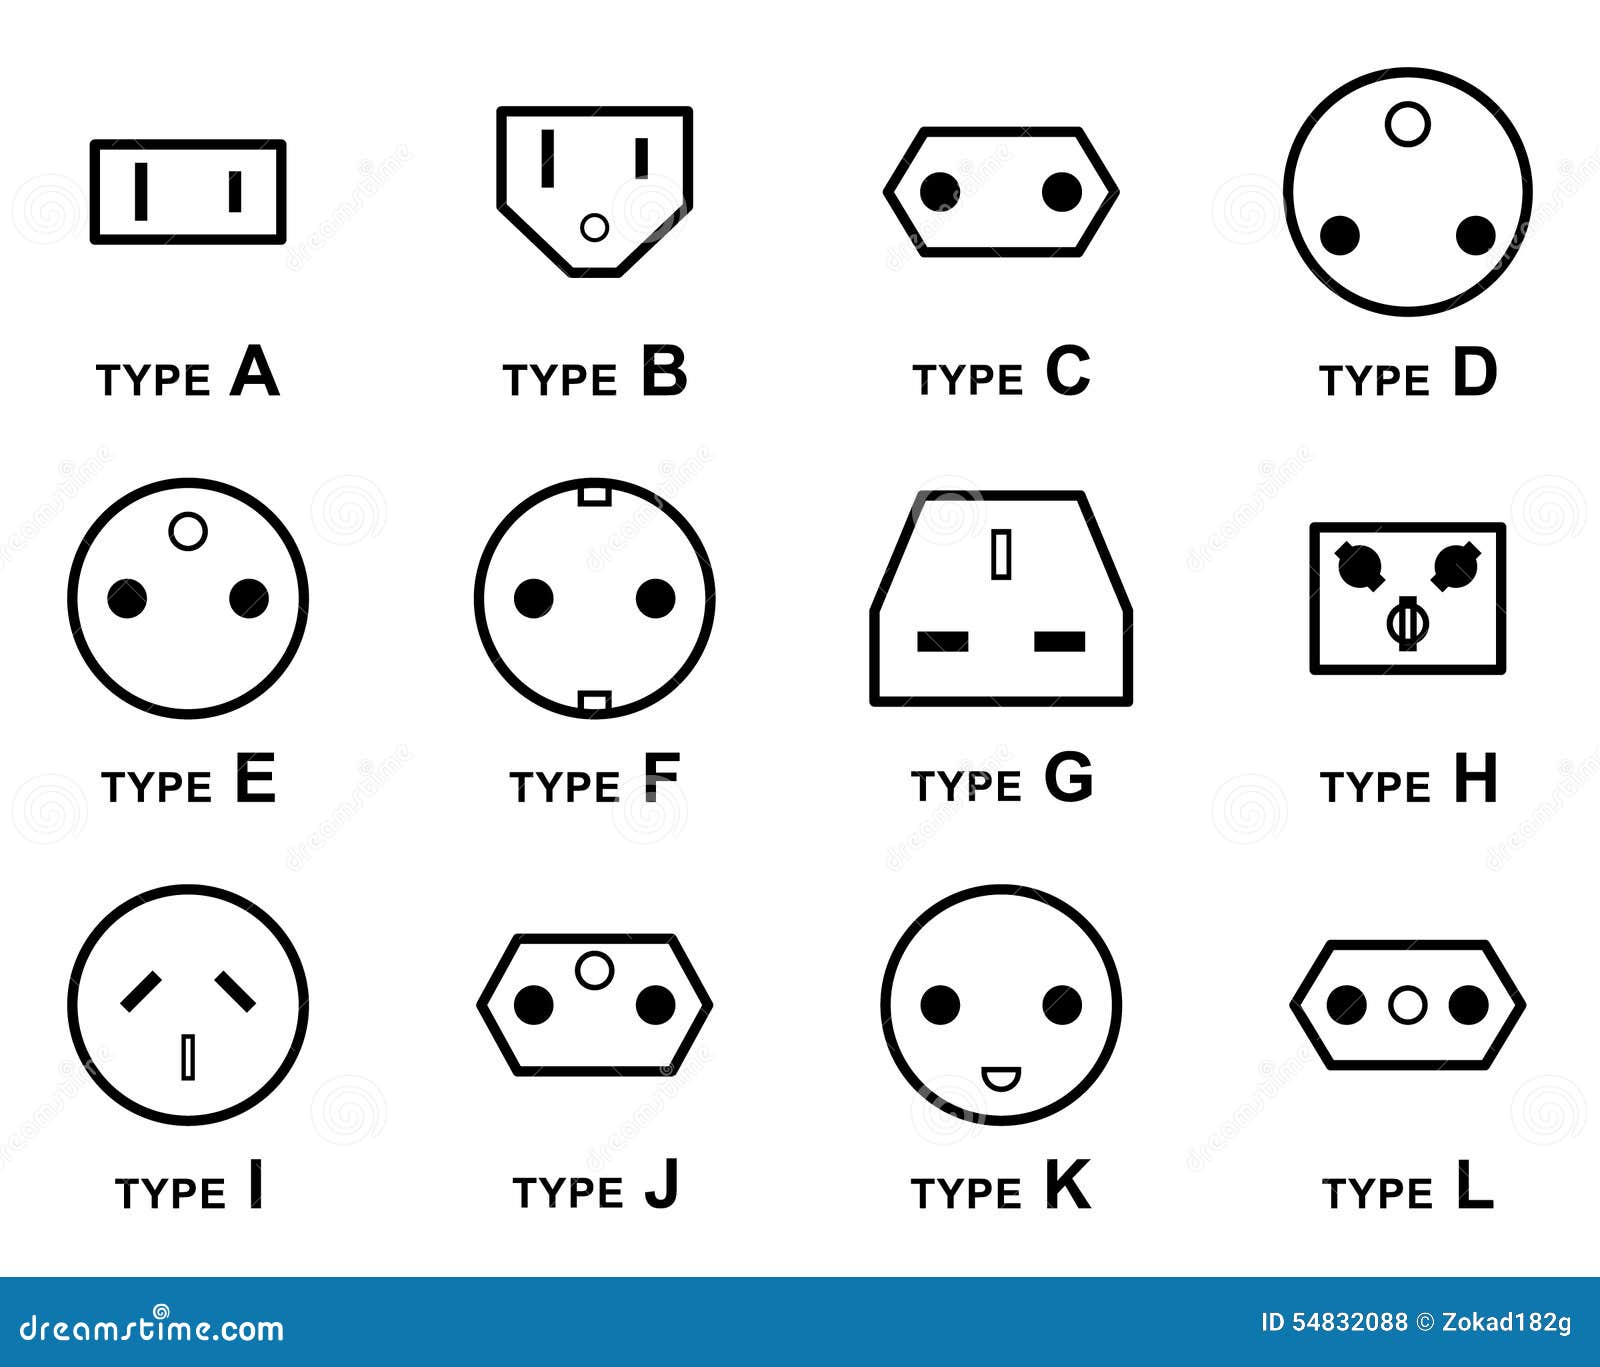 electrical plug types image vector illustration can be scaled to any size loss resolution 54832088